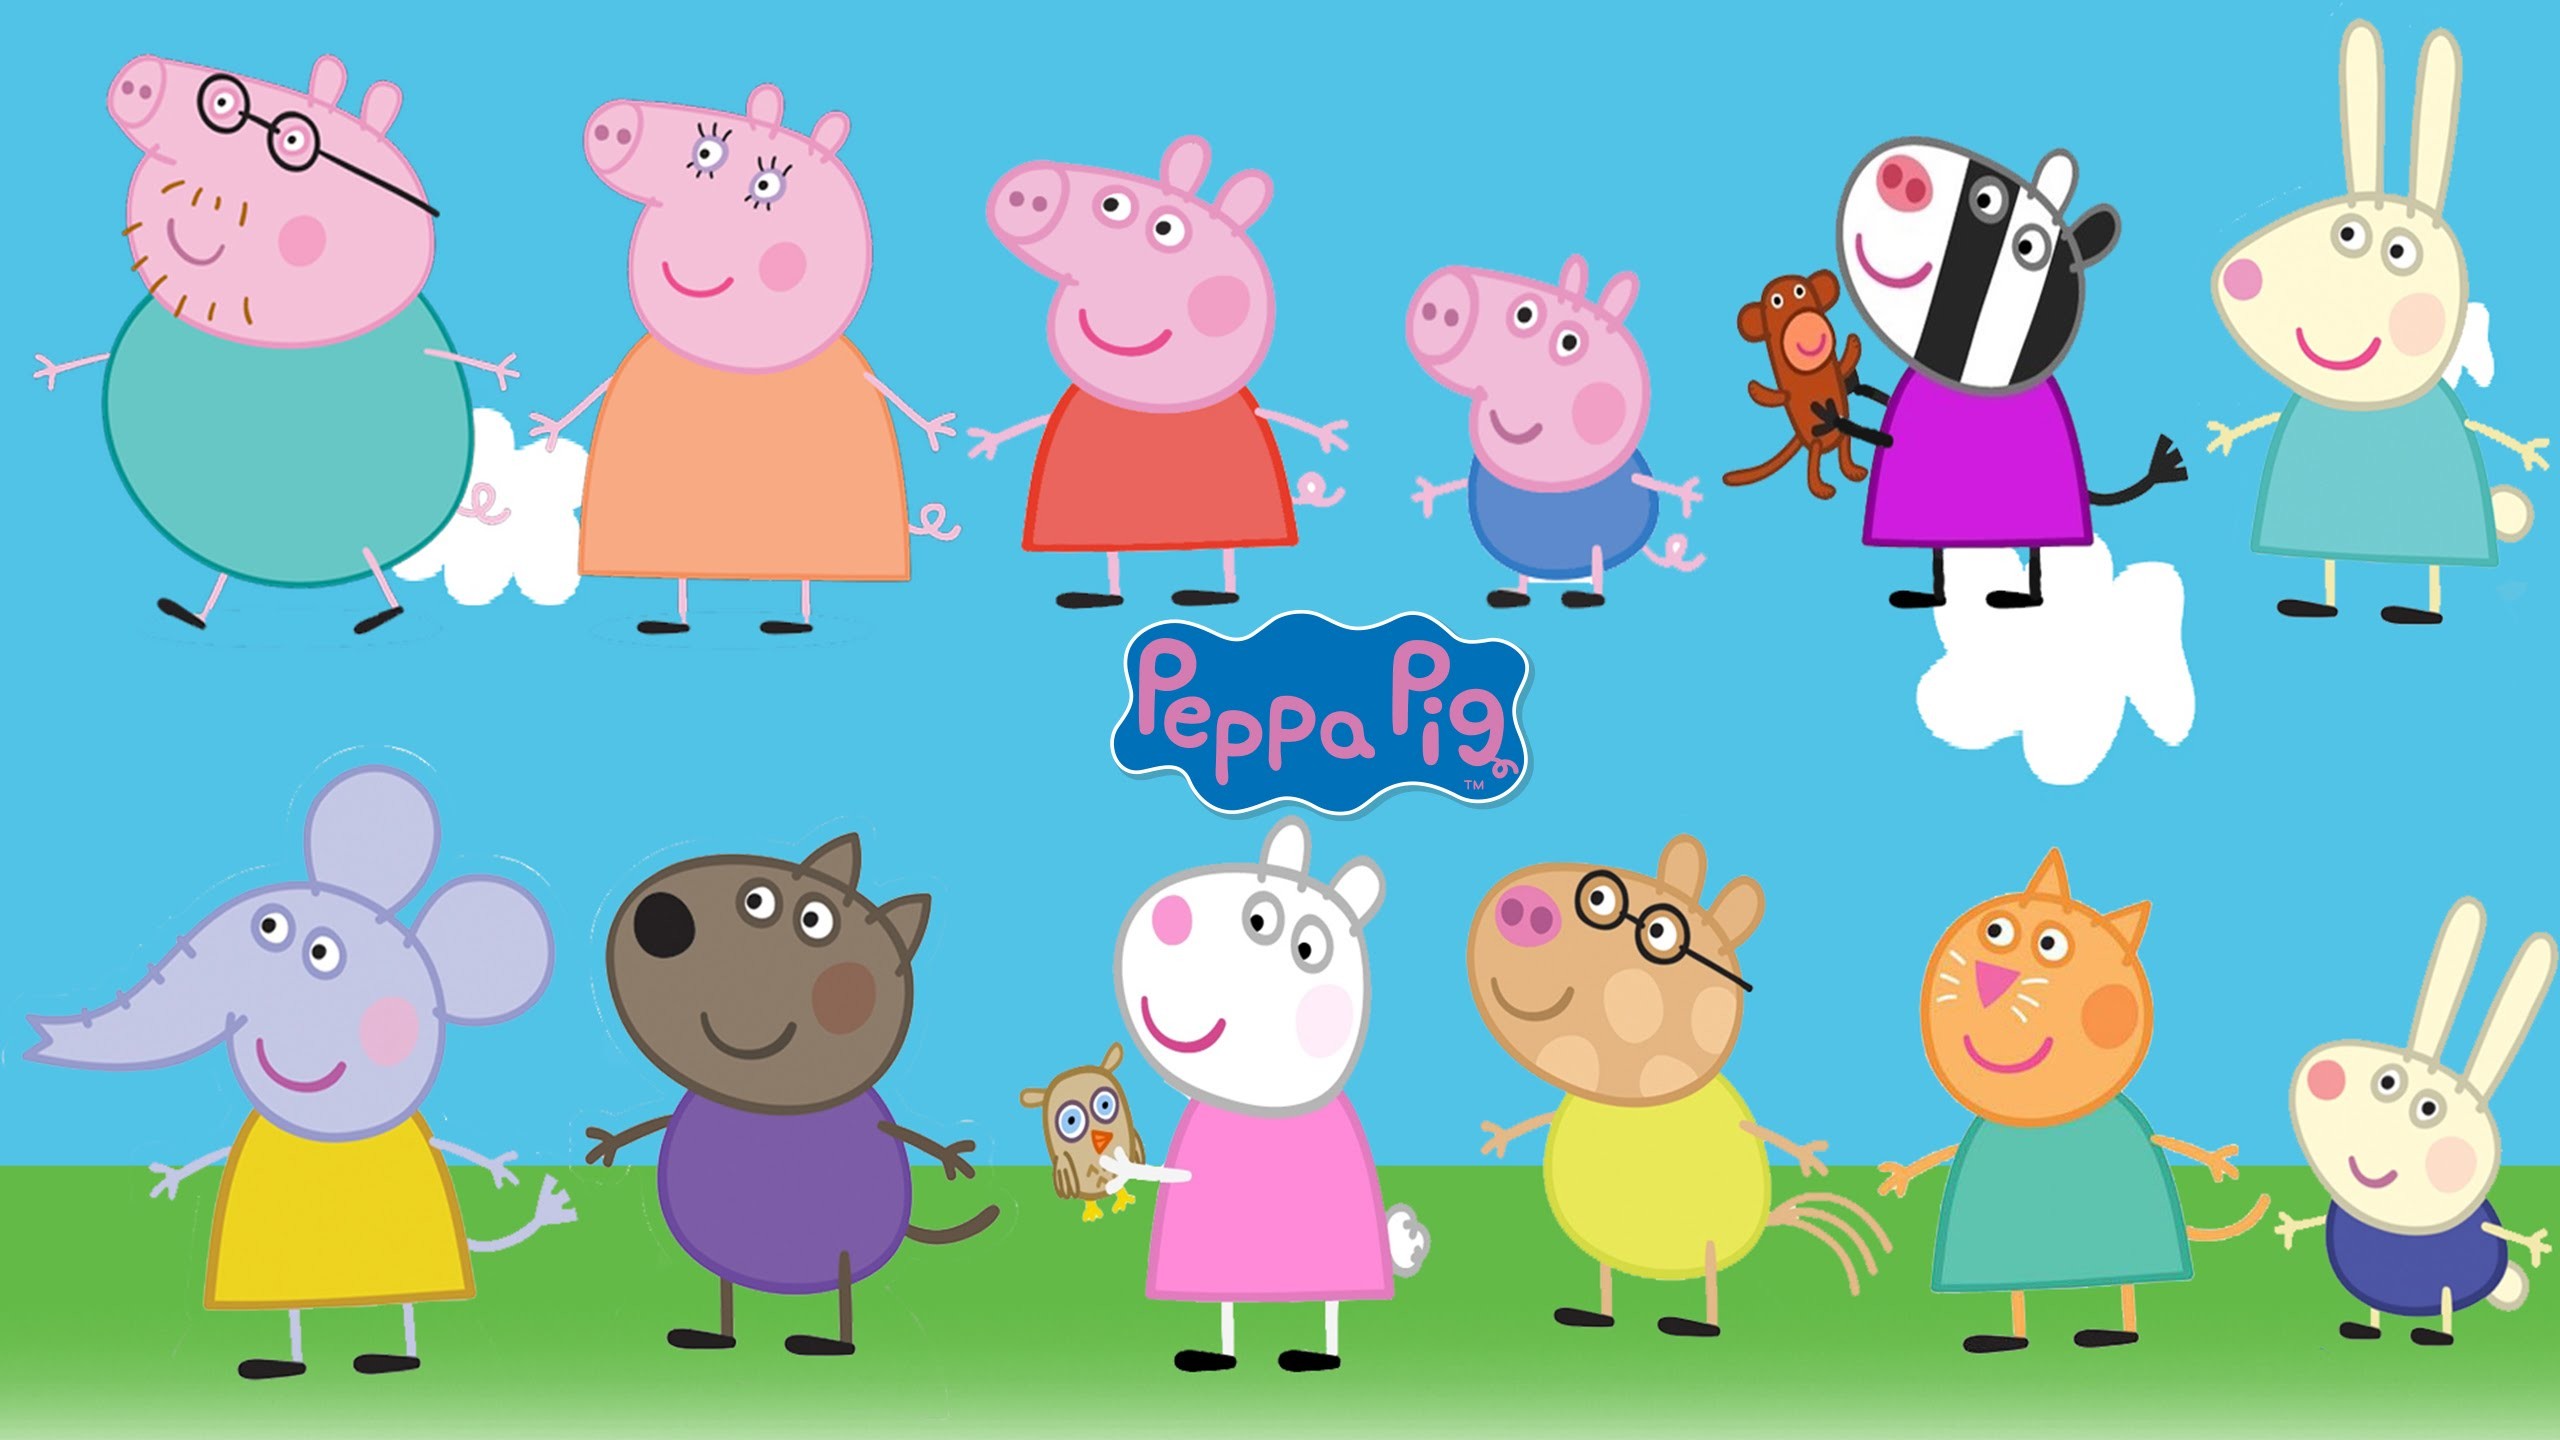 My top peppa pig episodes with powerful life lessons that may help you to raise a champion kid